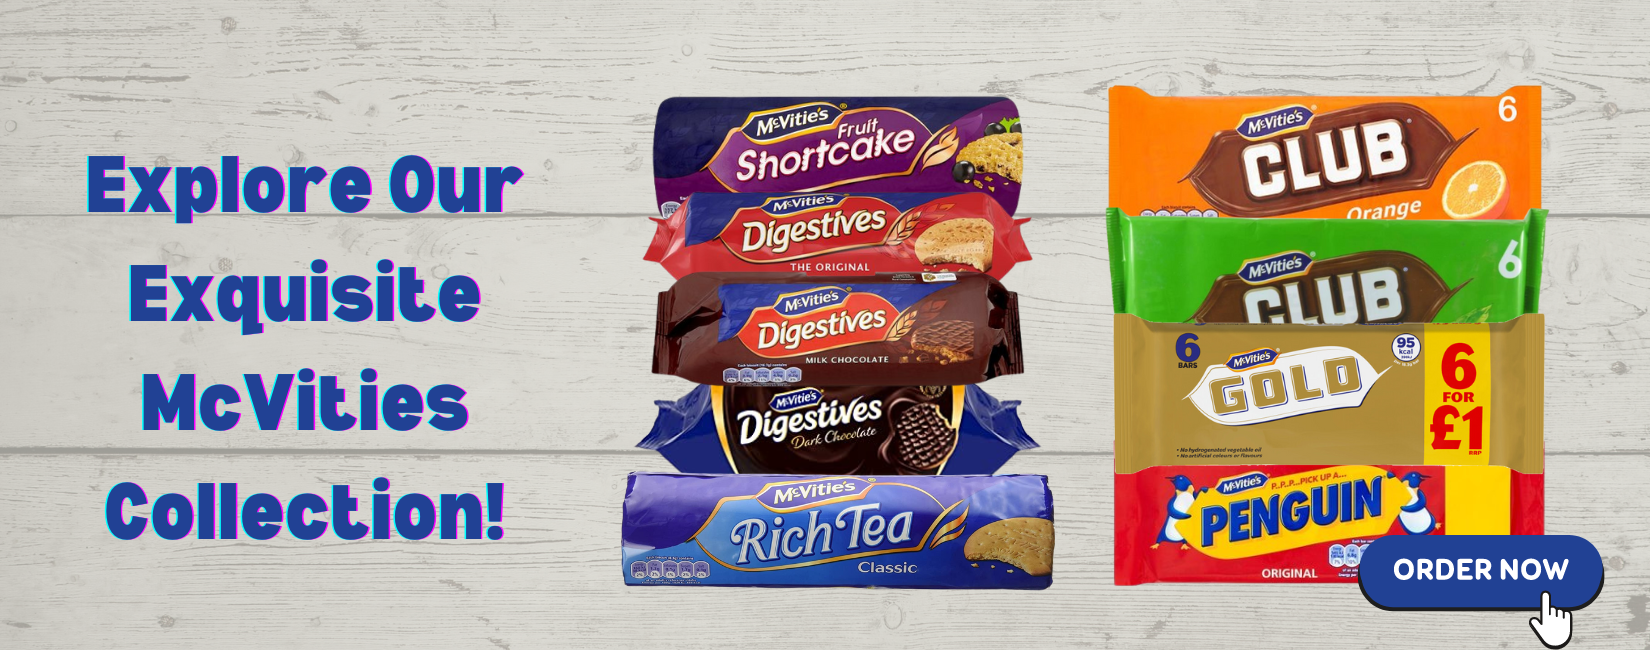 files/Our_Exquisite_McVities_Collection_2.png